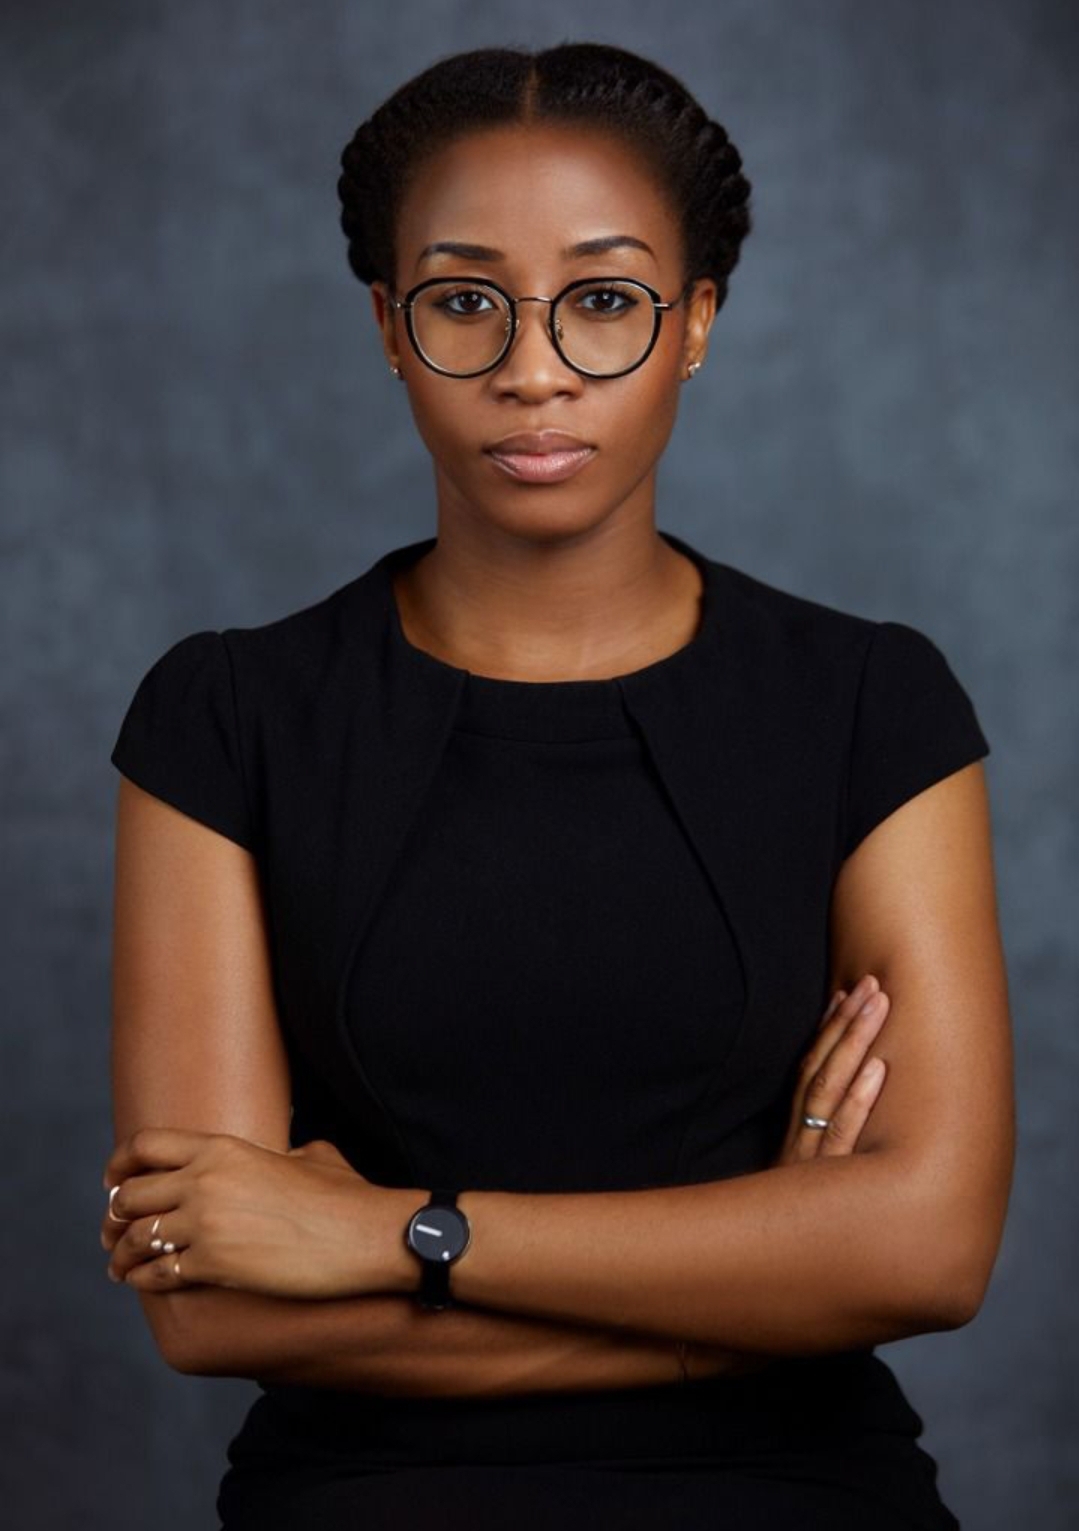 Exclusive Interview With Nigerian Architect - Tosin Oshinowo